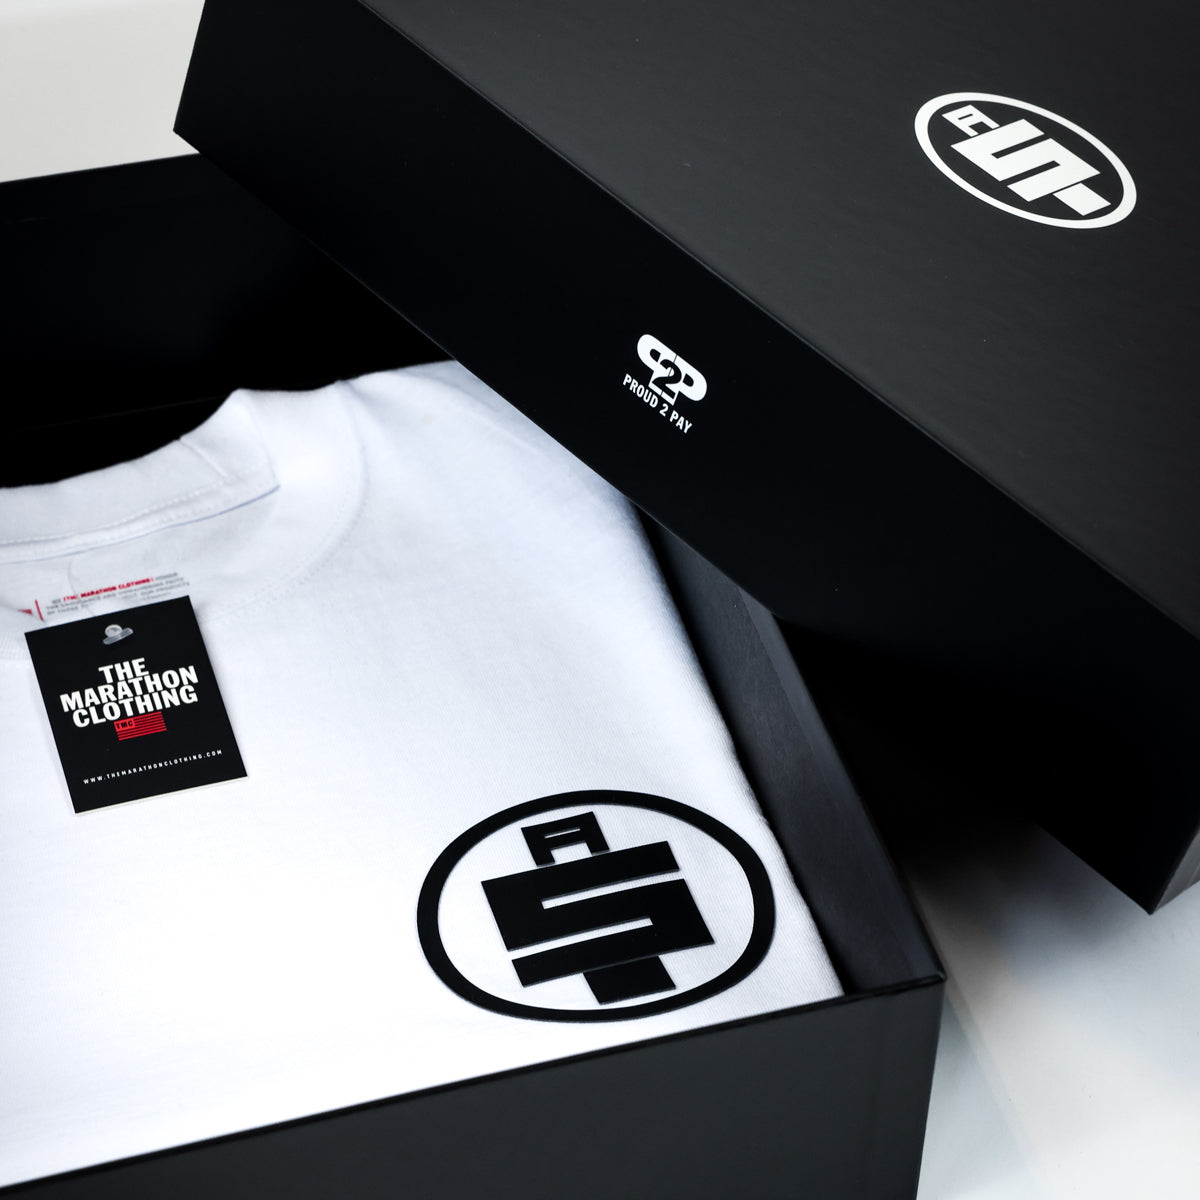 All Money In Limited Edition T-Shirt - White/Black with Custom Box.